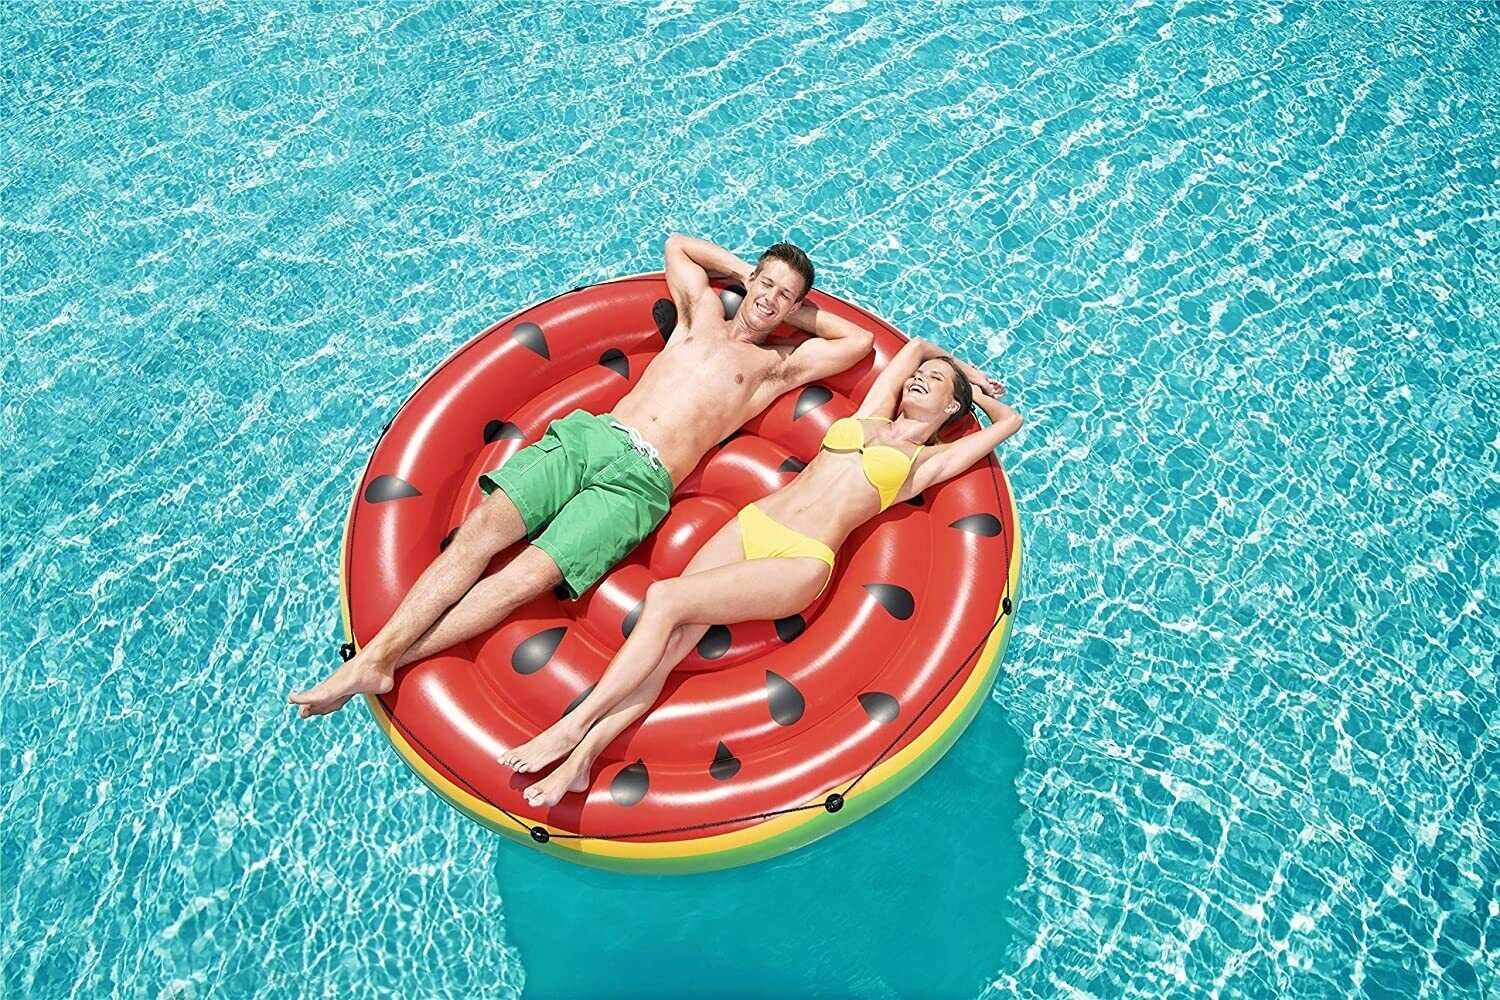 Geezy Pool Float Inflatable Rubber Bestway Watermelon Island Pool Float Inflatable Lilo Novelty Lounger Beach Toy